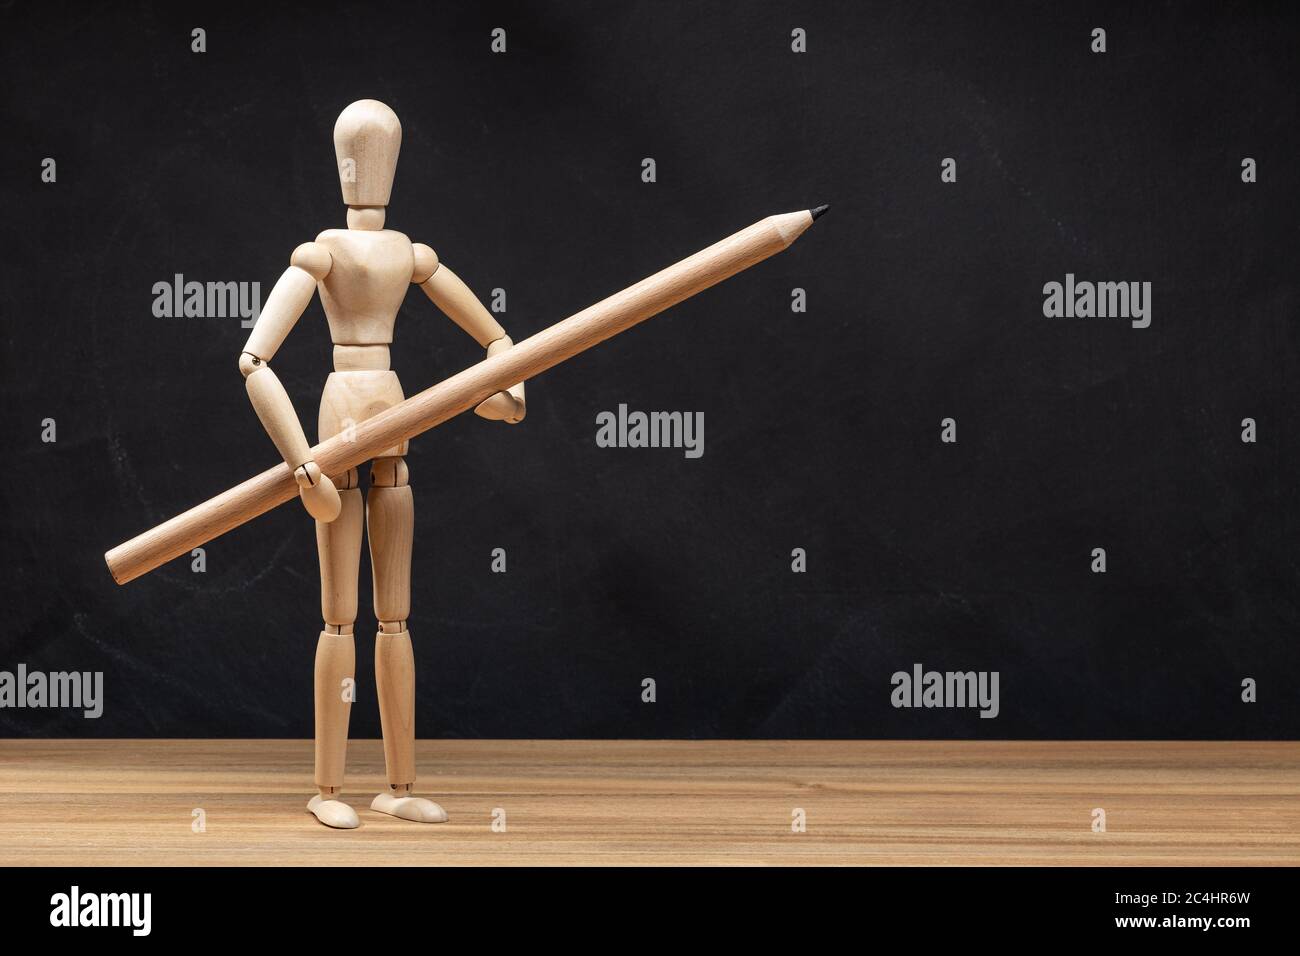 Wooden mannequin holding a pencil. Blackboard background. Drawing concept. Copy space Stock Photo